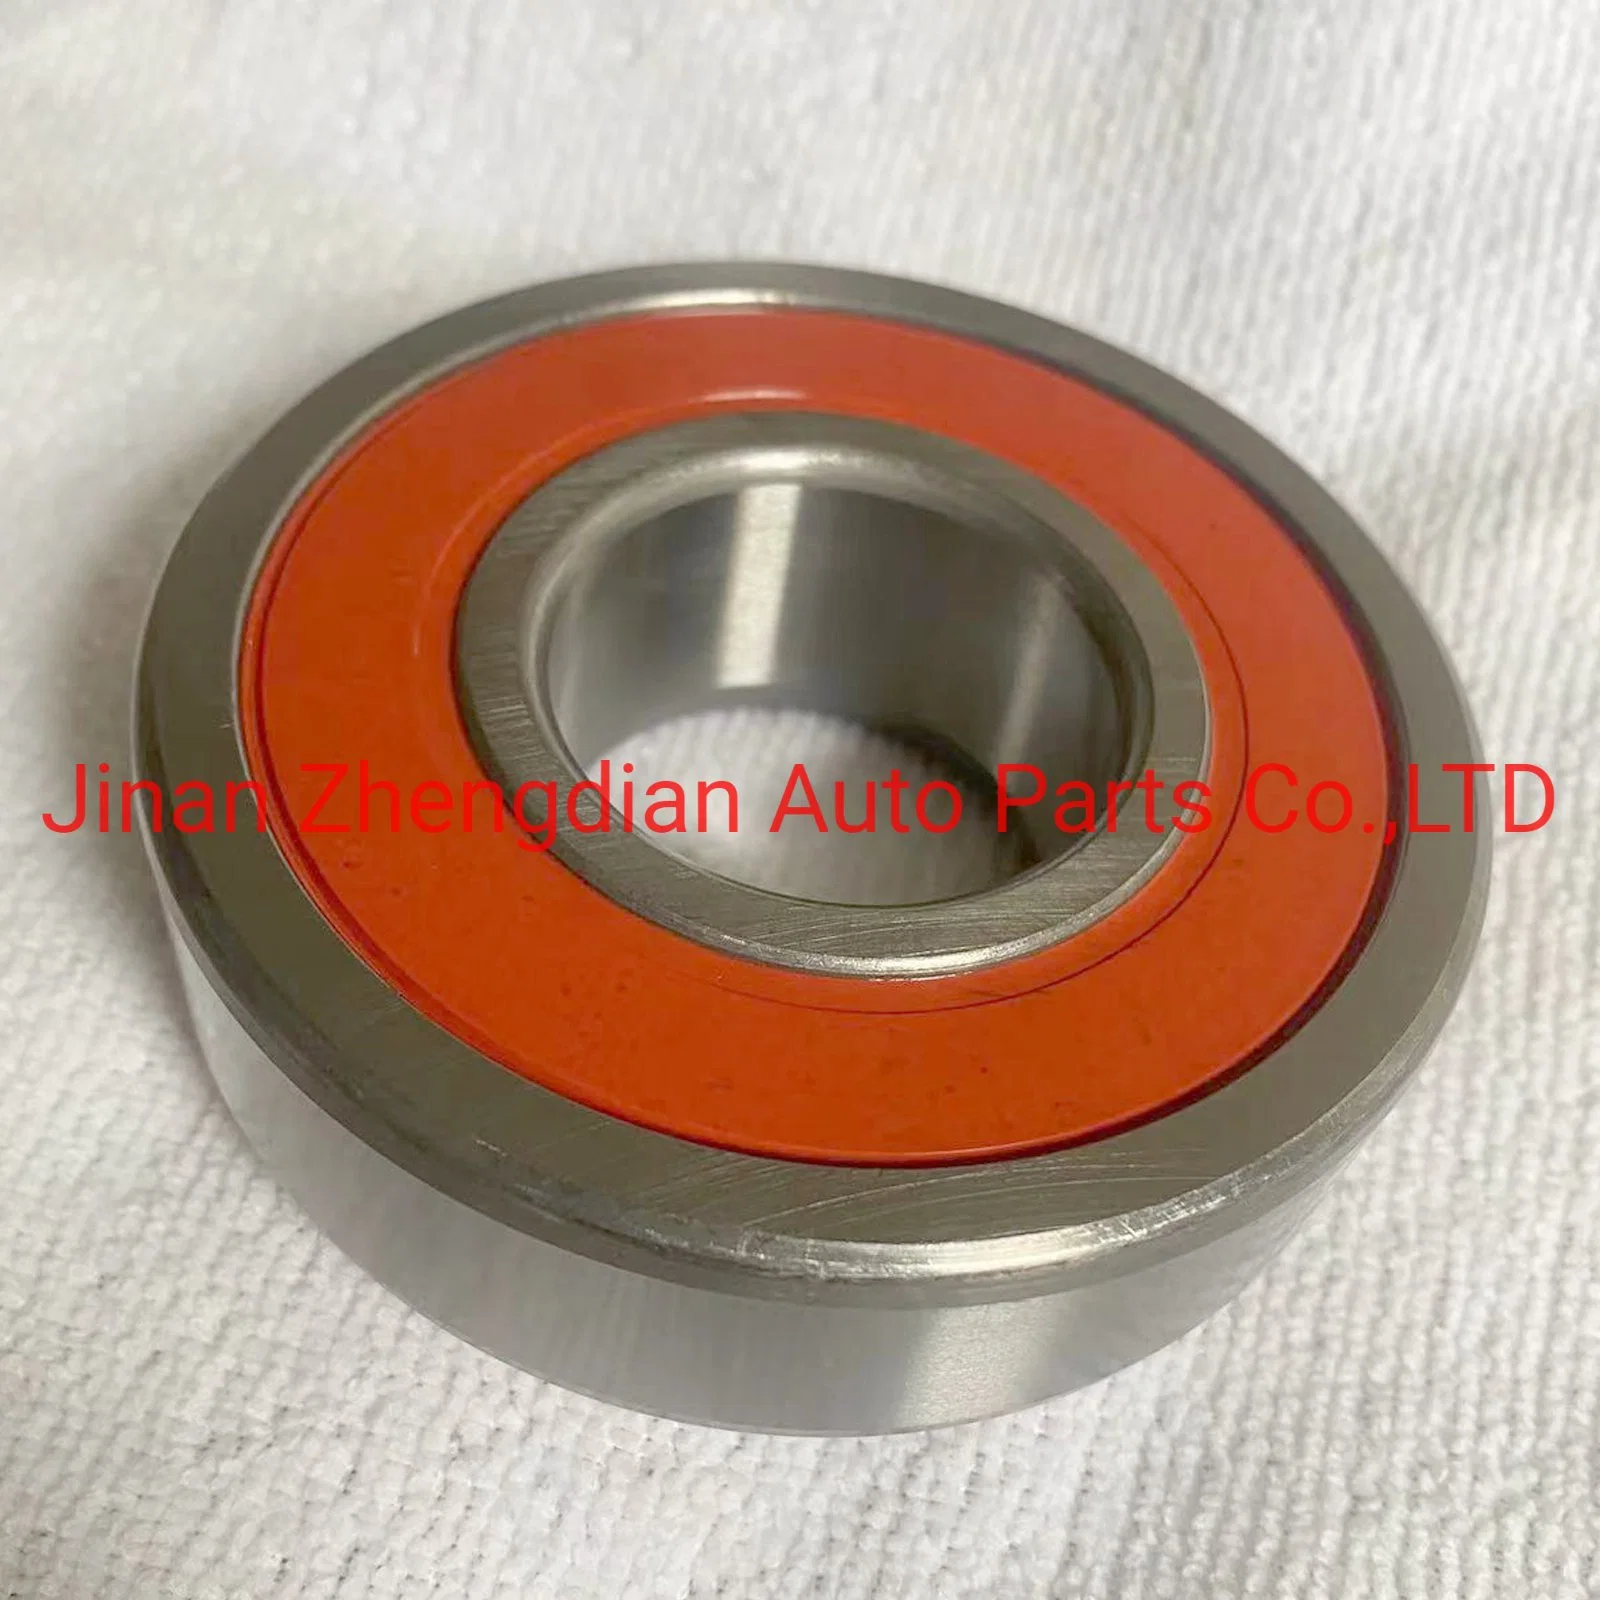 Different Model Ball Bearing Auto Wheel Hub Taper Roller Bearing Cylindrical Roller Bearing Needle Bearing for Truck Spare Parts Auto Parts